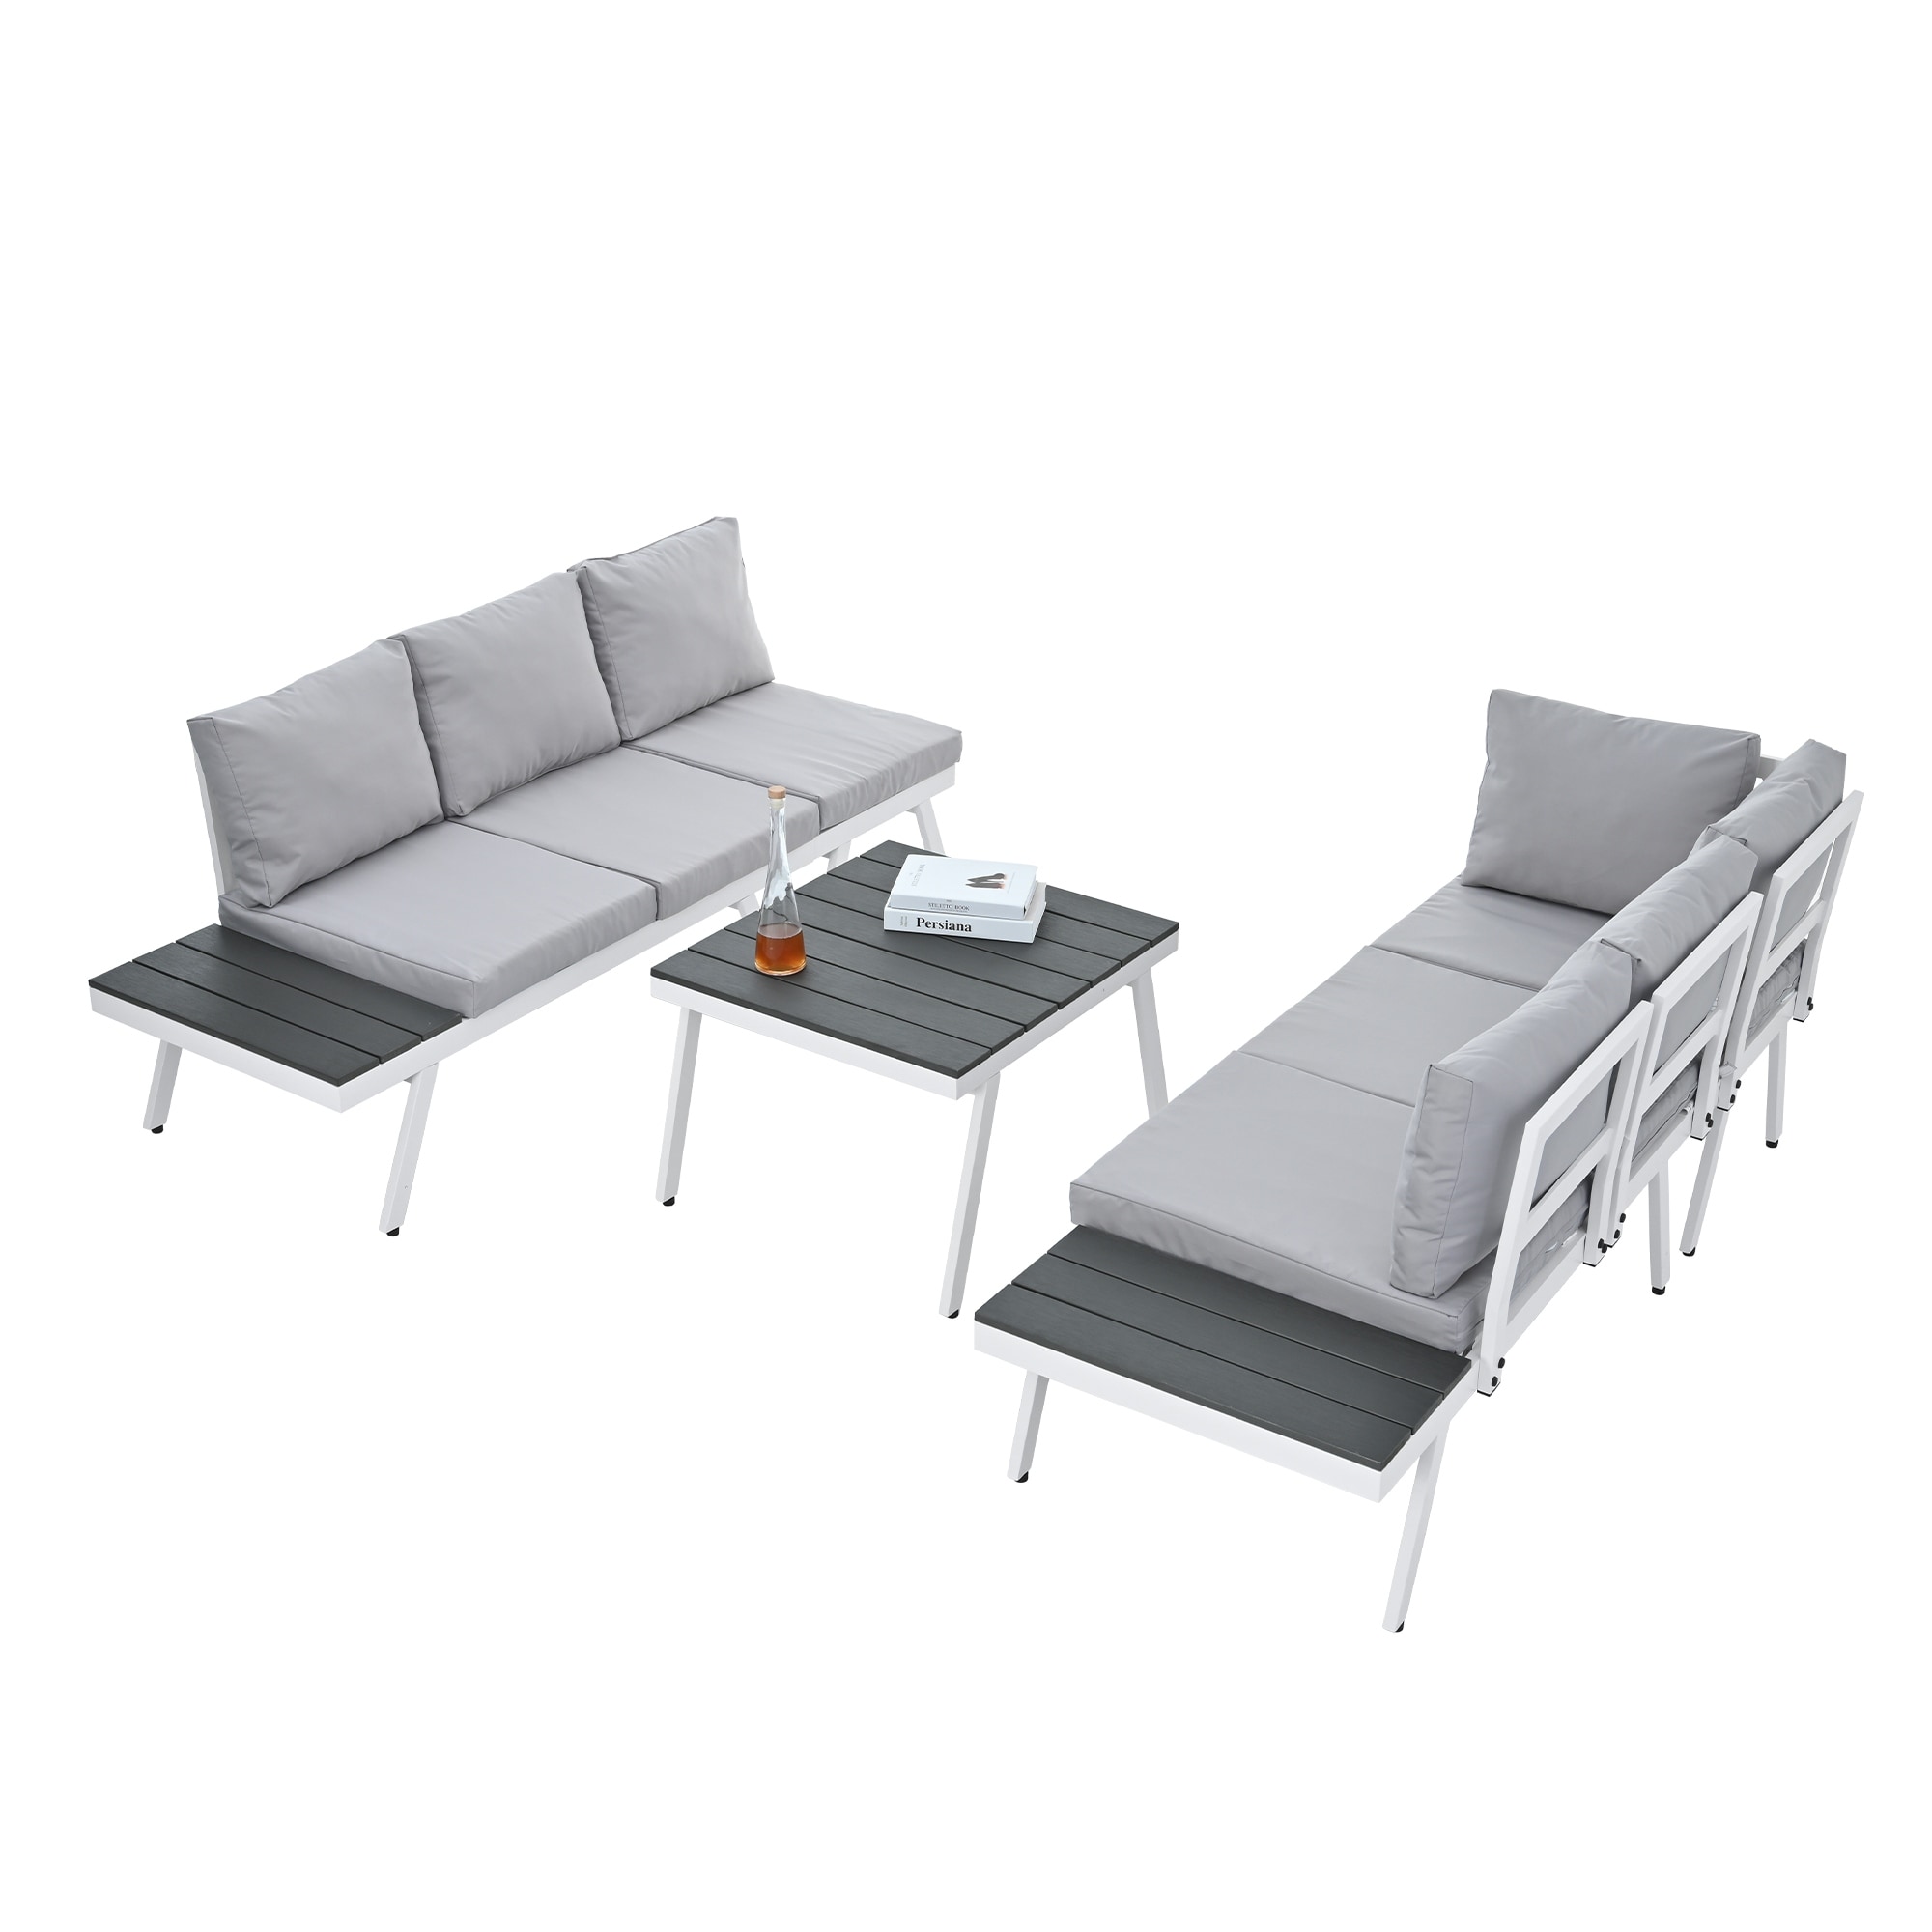 5-piece Aluminum Outdoor Patio Furniture Set  Modern Garden Sectional Sofa Set With End Coffee Table  For Backyard  Grey